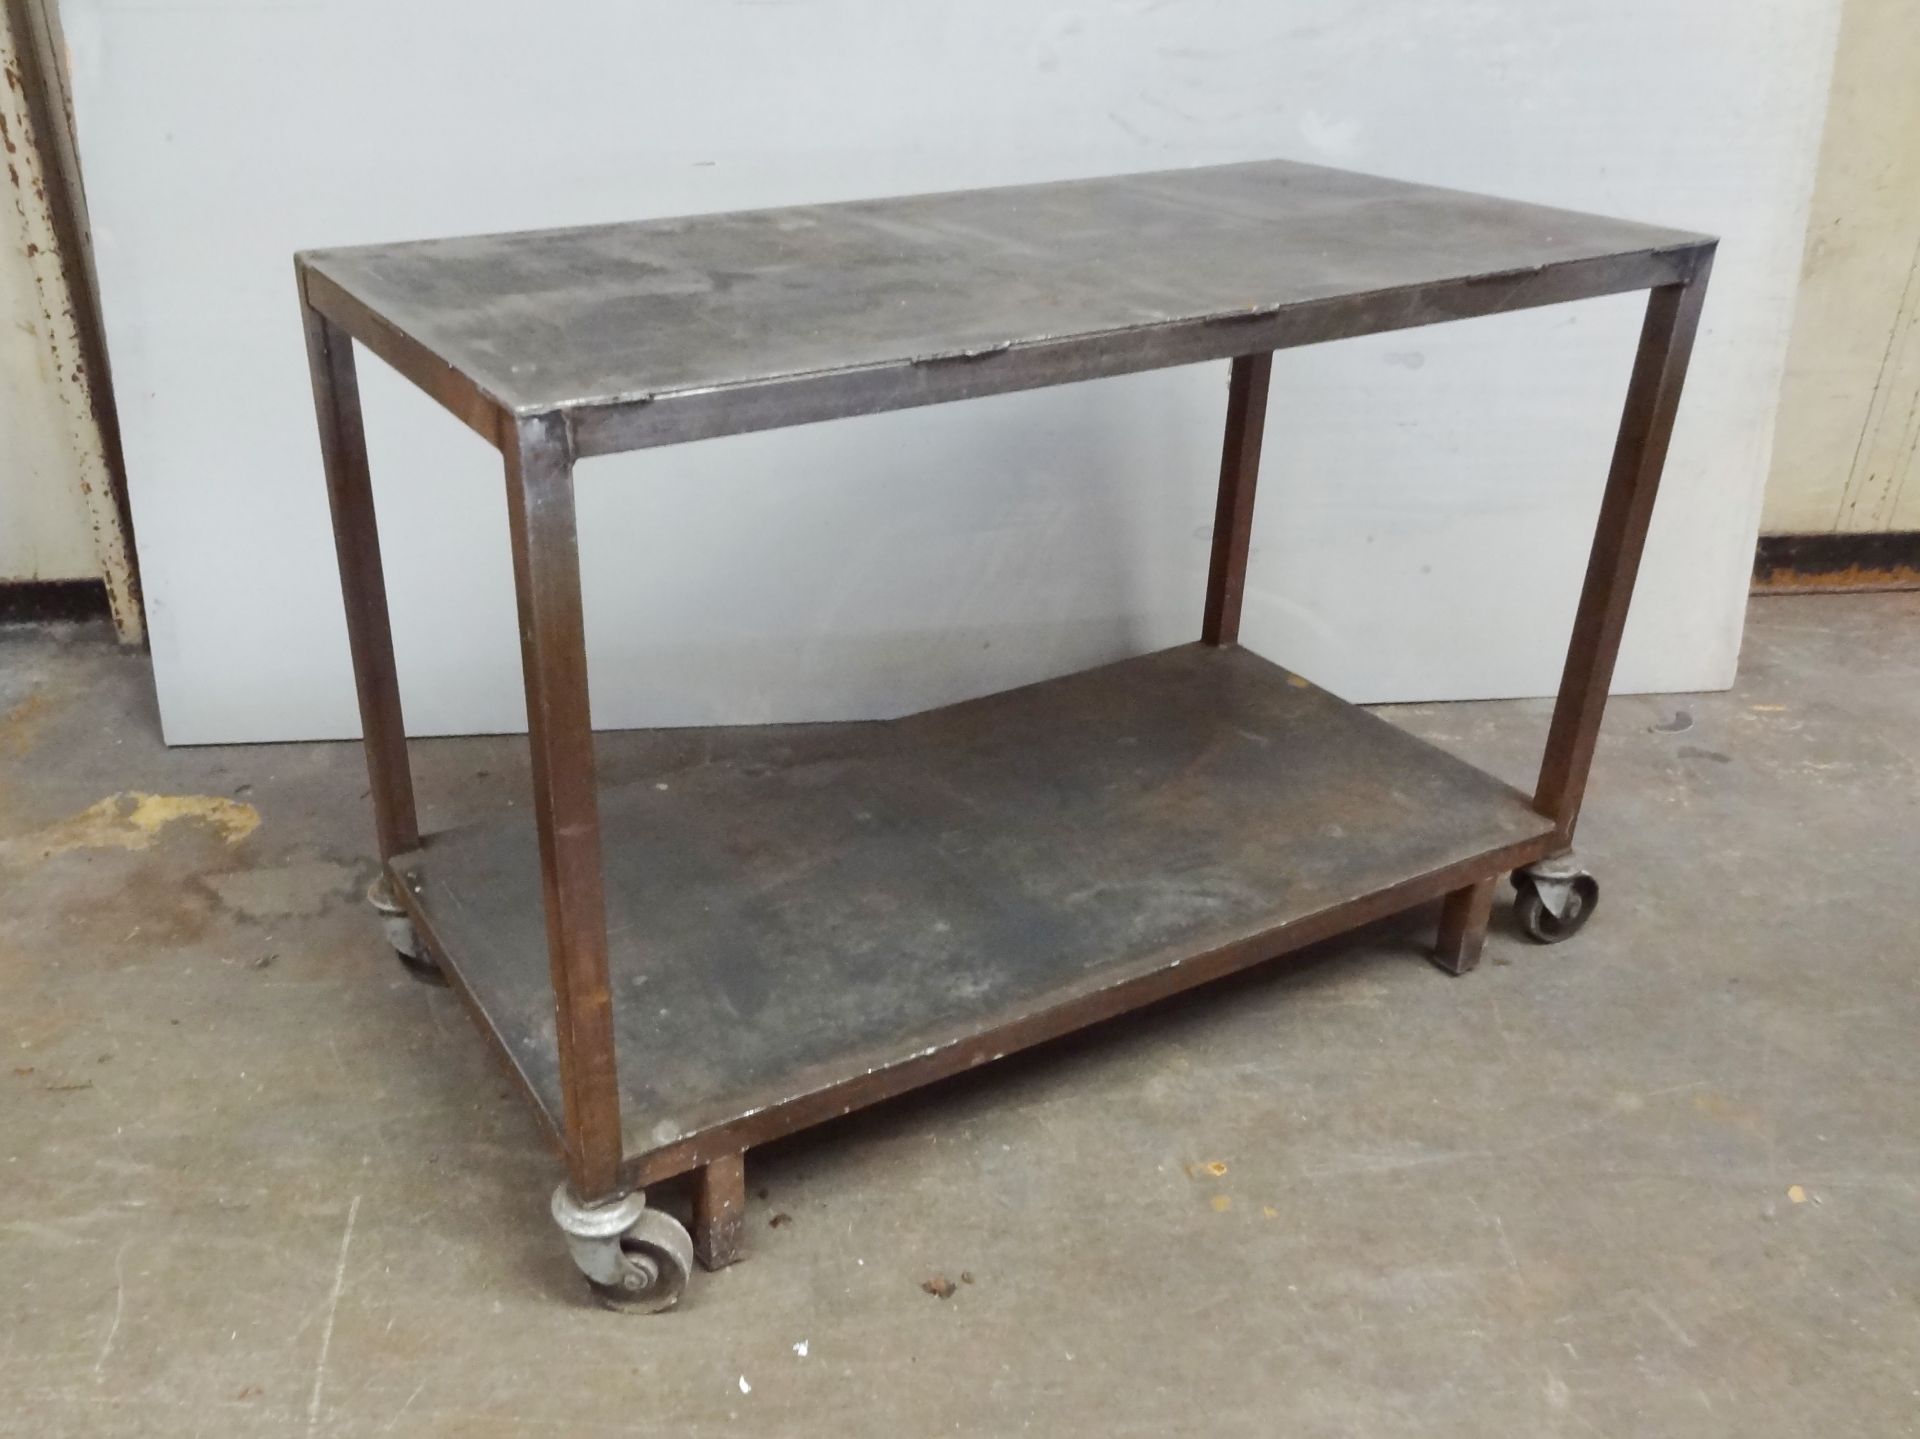 Two Heavy Duty Work Trolleys, with steel top and base shelf, approx. 1.25m x 625mm